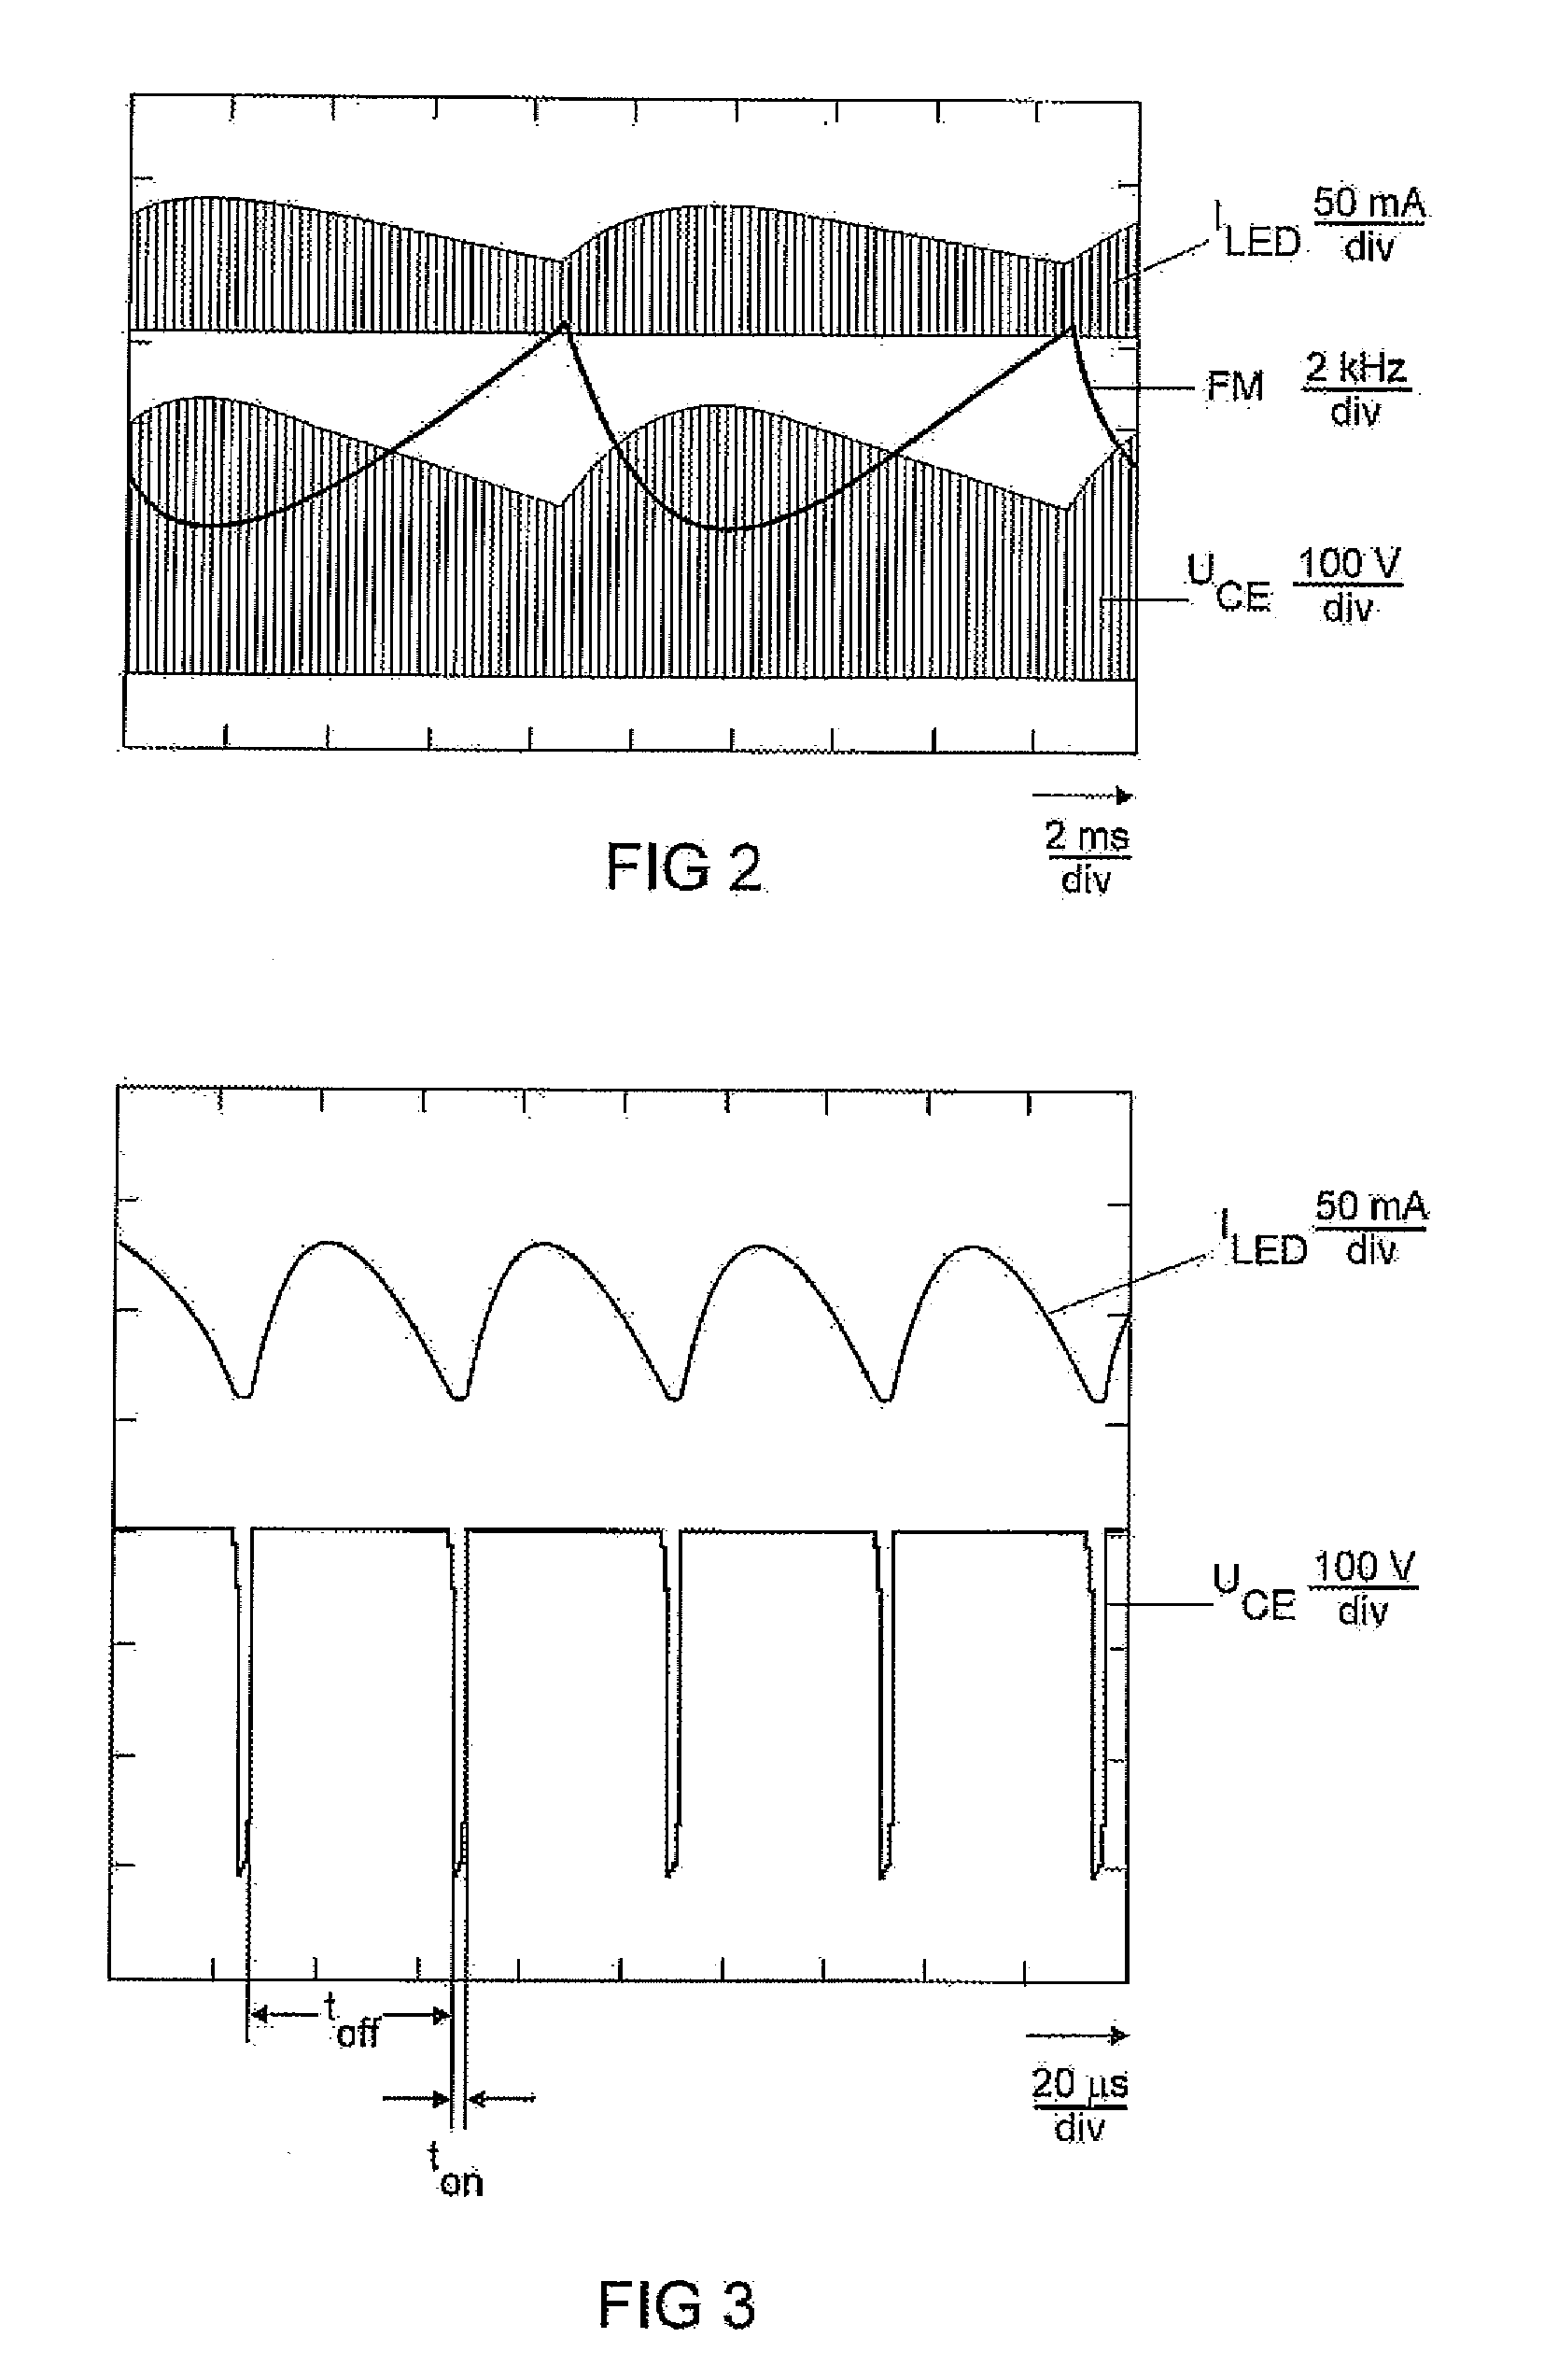 Buck converter for making power available to at least one LED